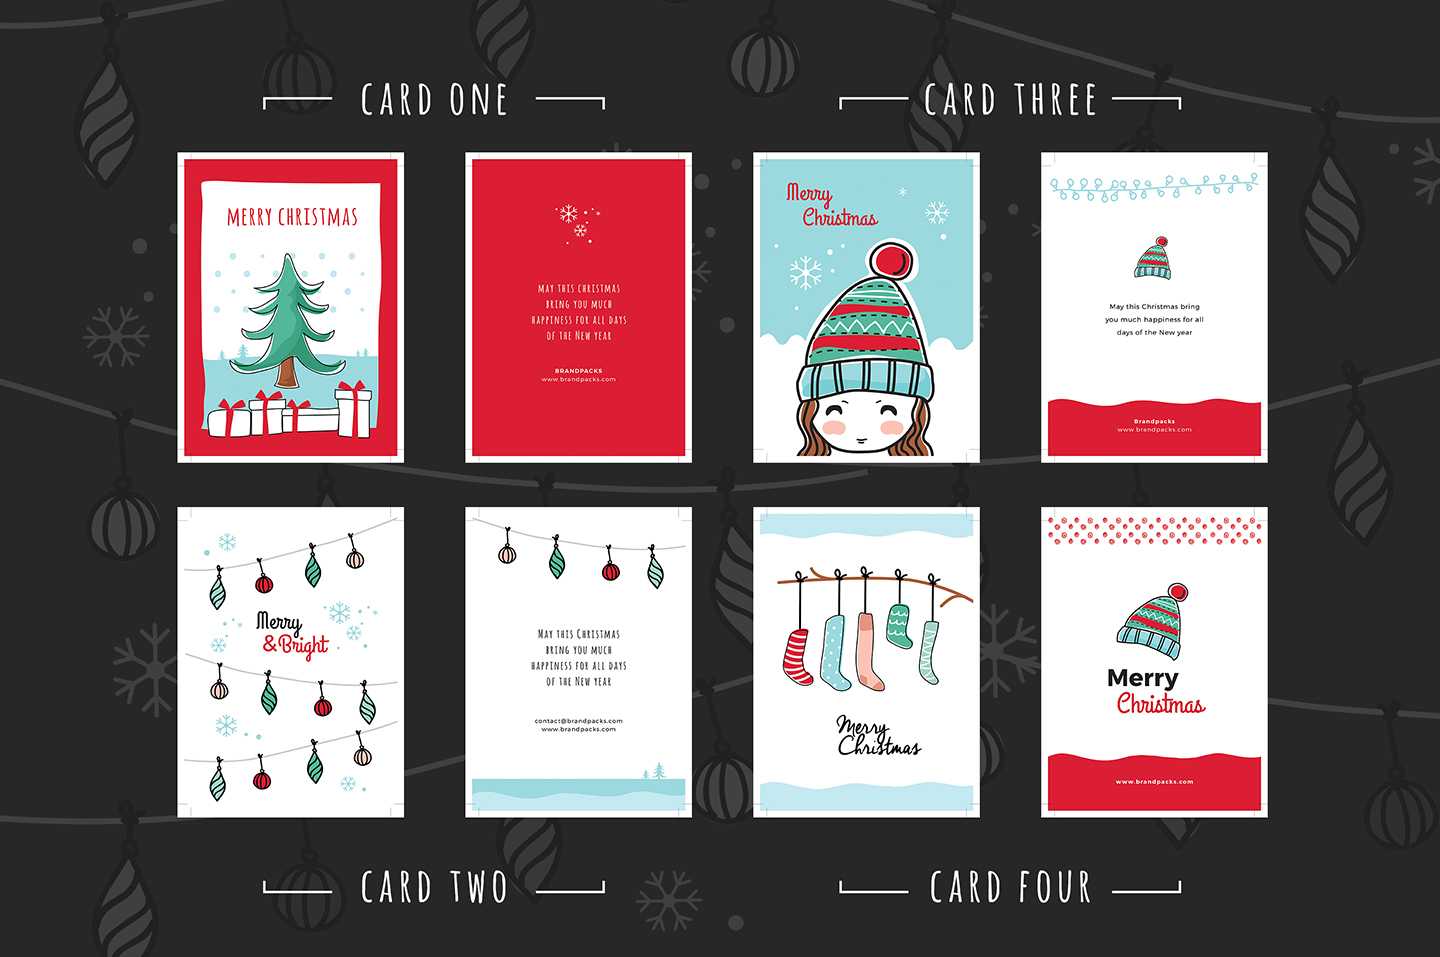 Free Christmas Card Templates For Photoshop & Illustrator Pertaining To Christmas Photo Card Templates Photoshop